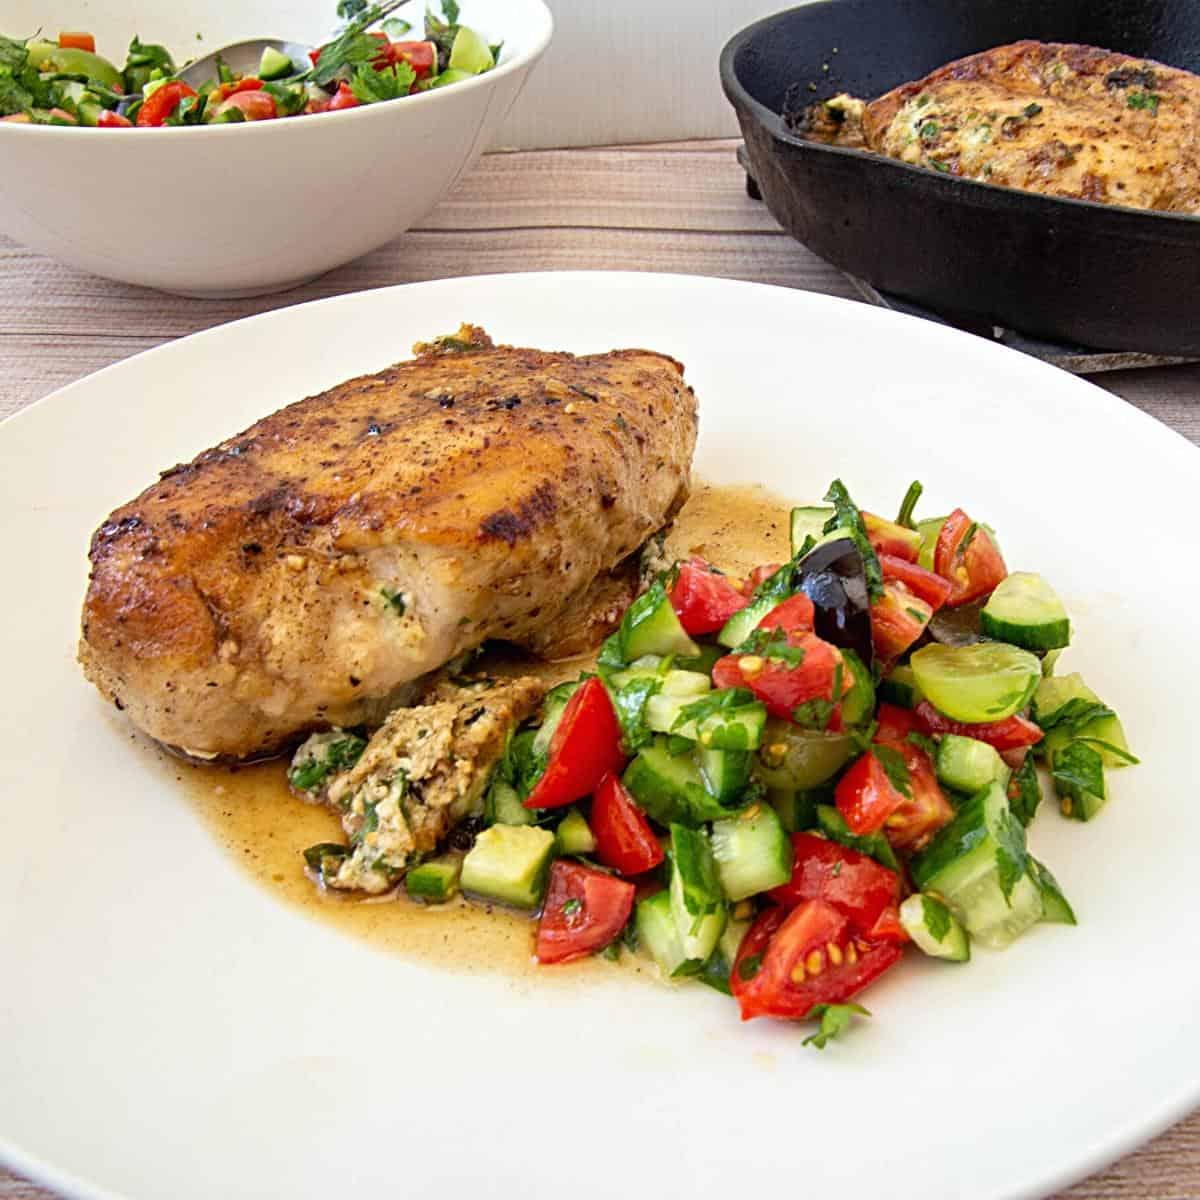 A plate with salad and stuffed chicken breast.